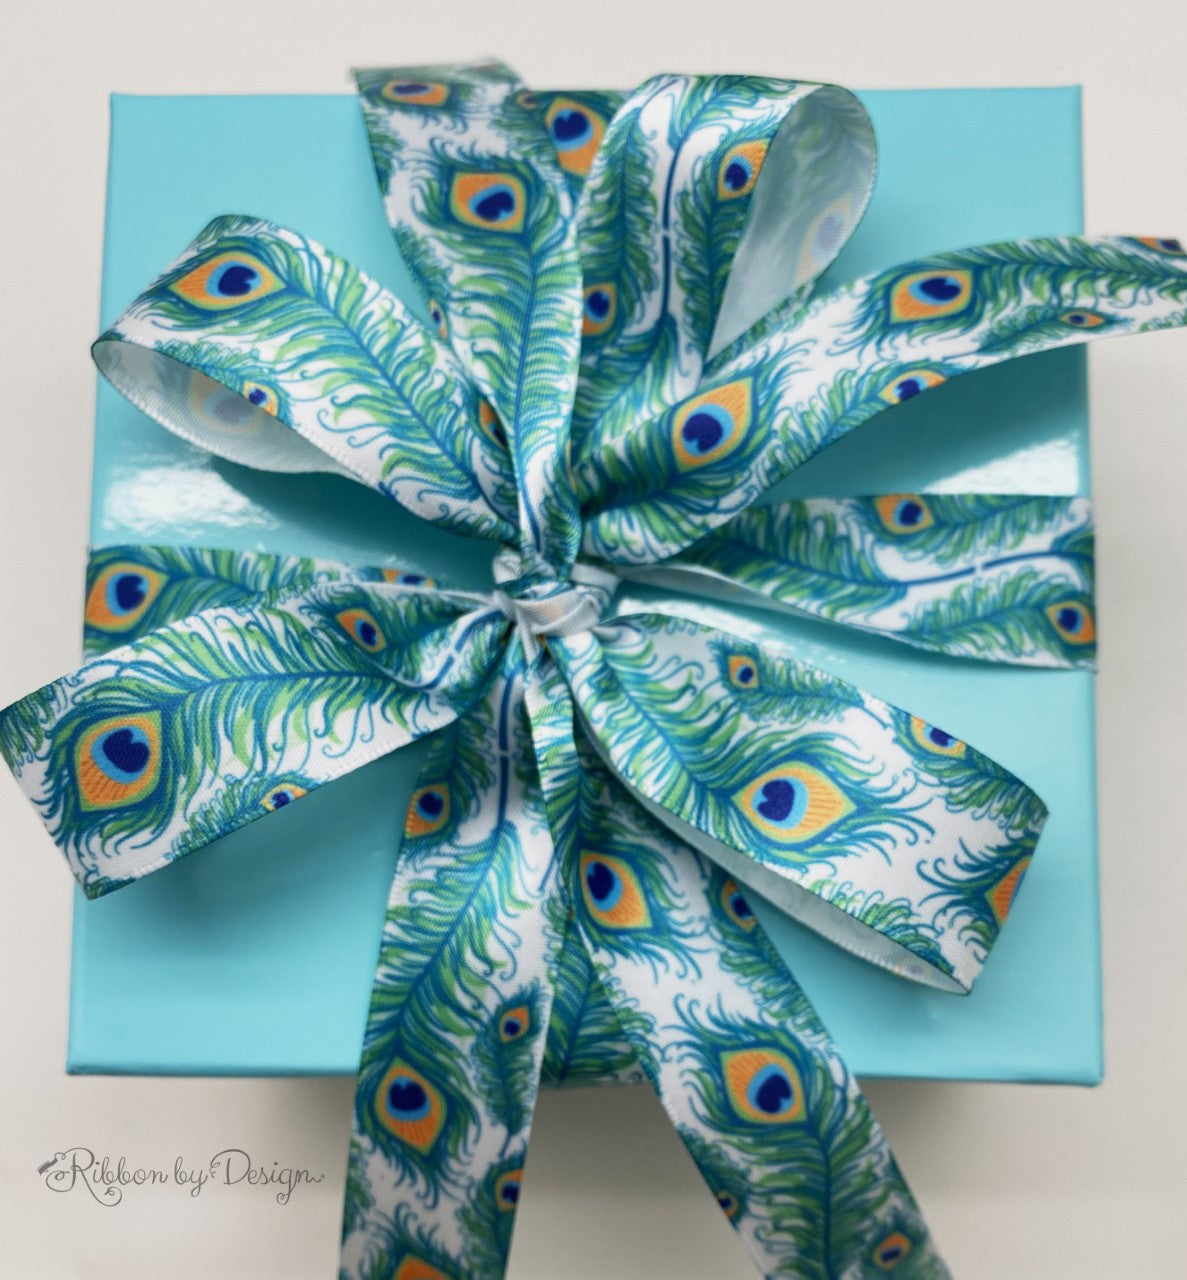 Peacock feathers in turquoise, green and blue printed on 7/8 white single  face satin ribbon, 10 yards